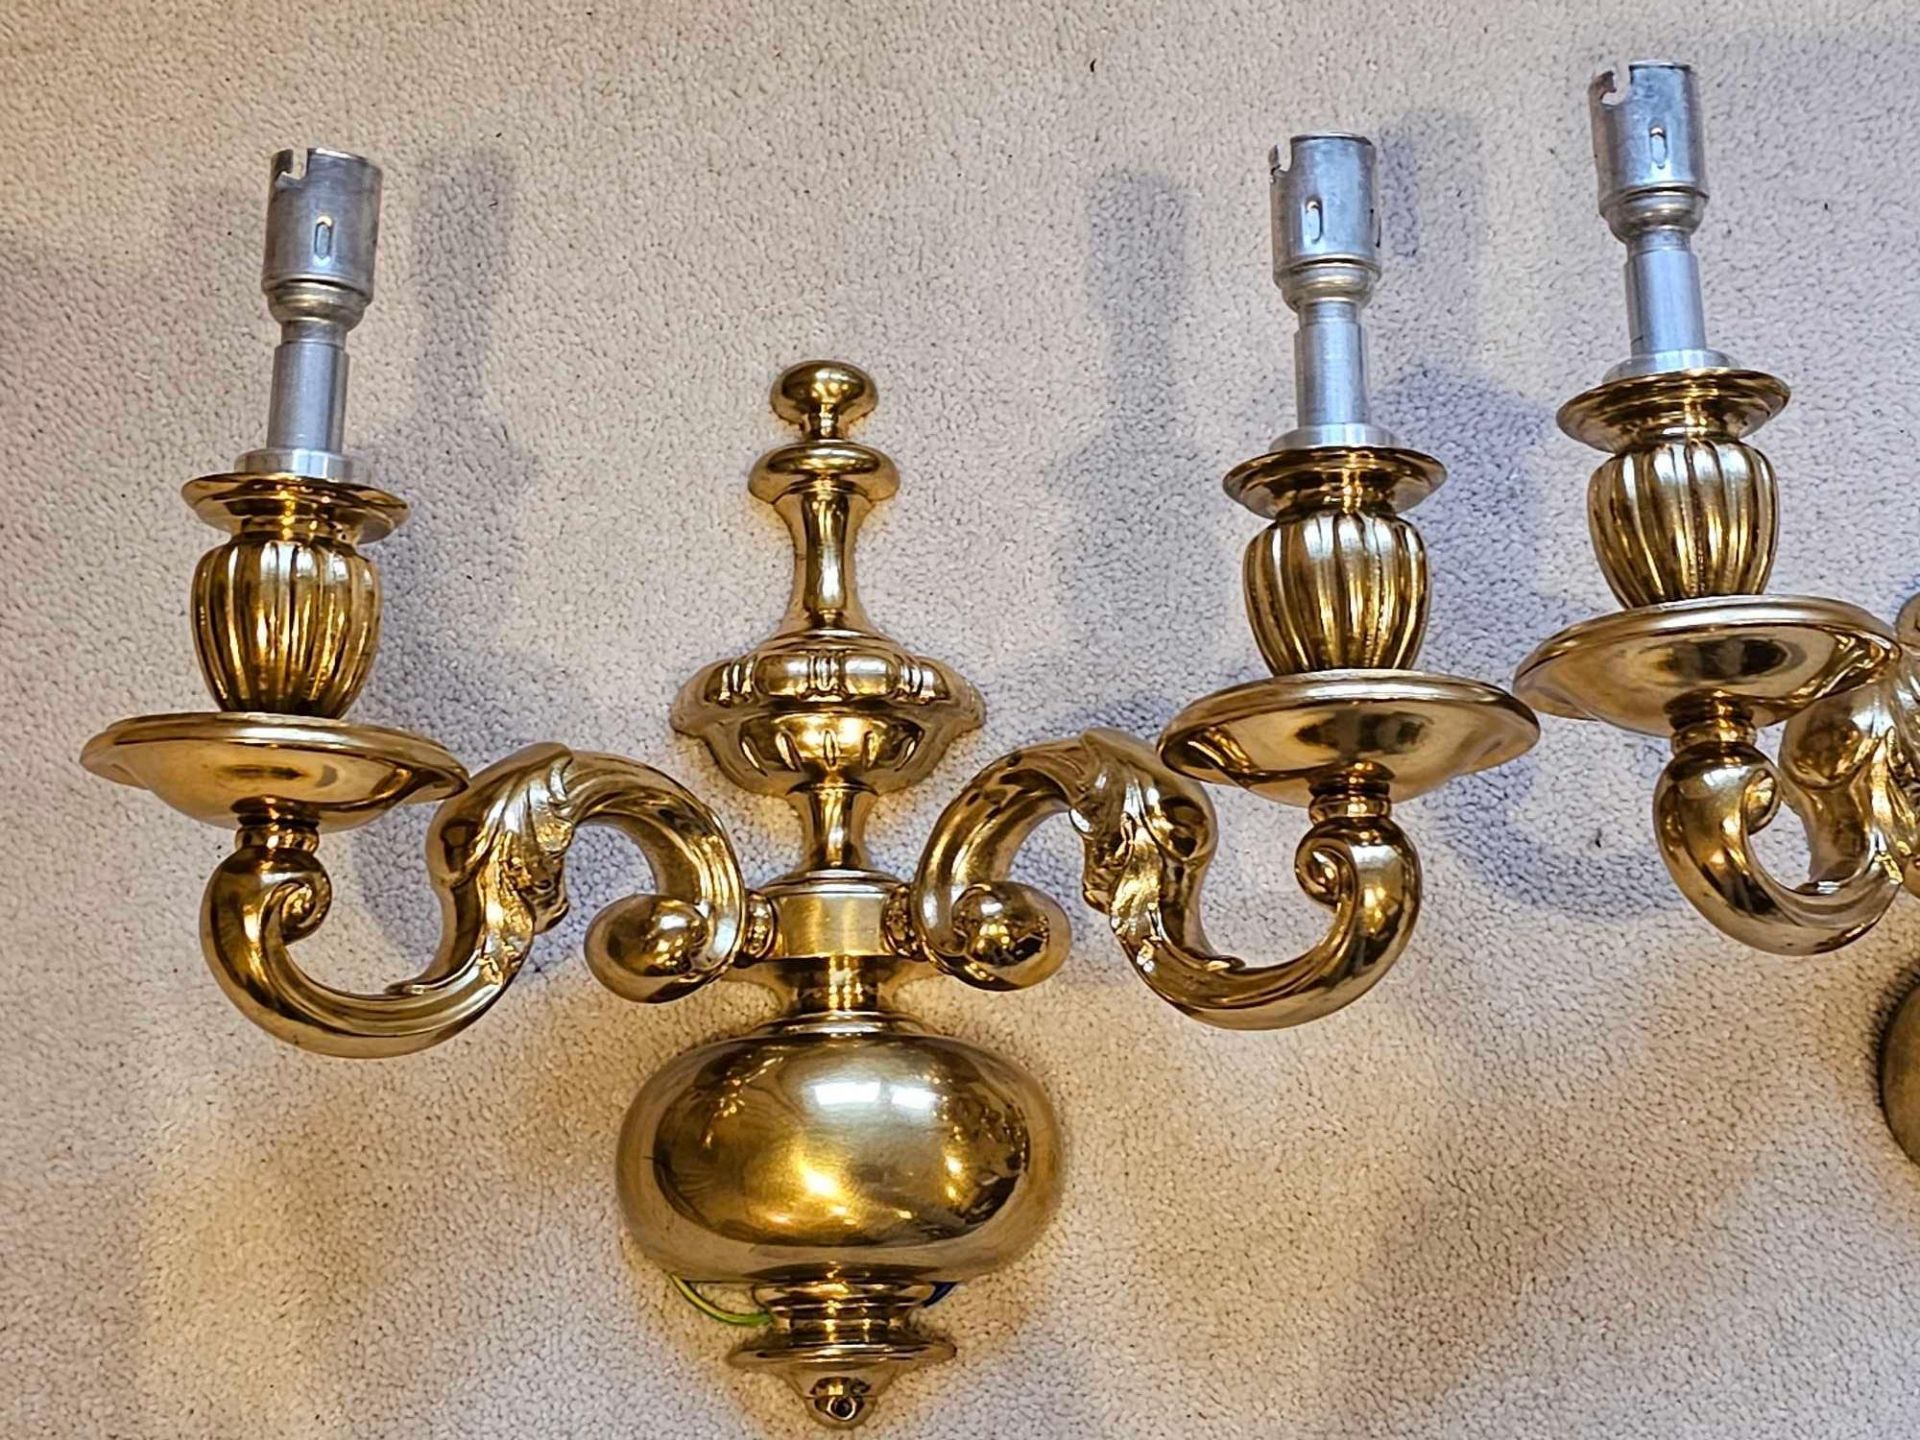 A Pair Dernier & Hamlyn Bespoke Lighting Twin Arm Wall Sconces Finished In Lacquered Gilt In The - Image 4 of 4